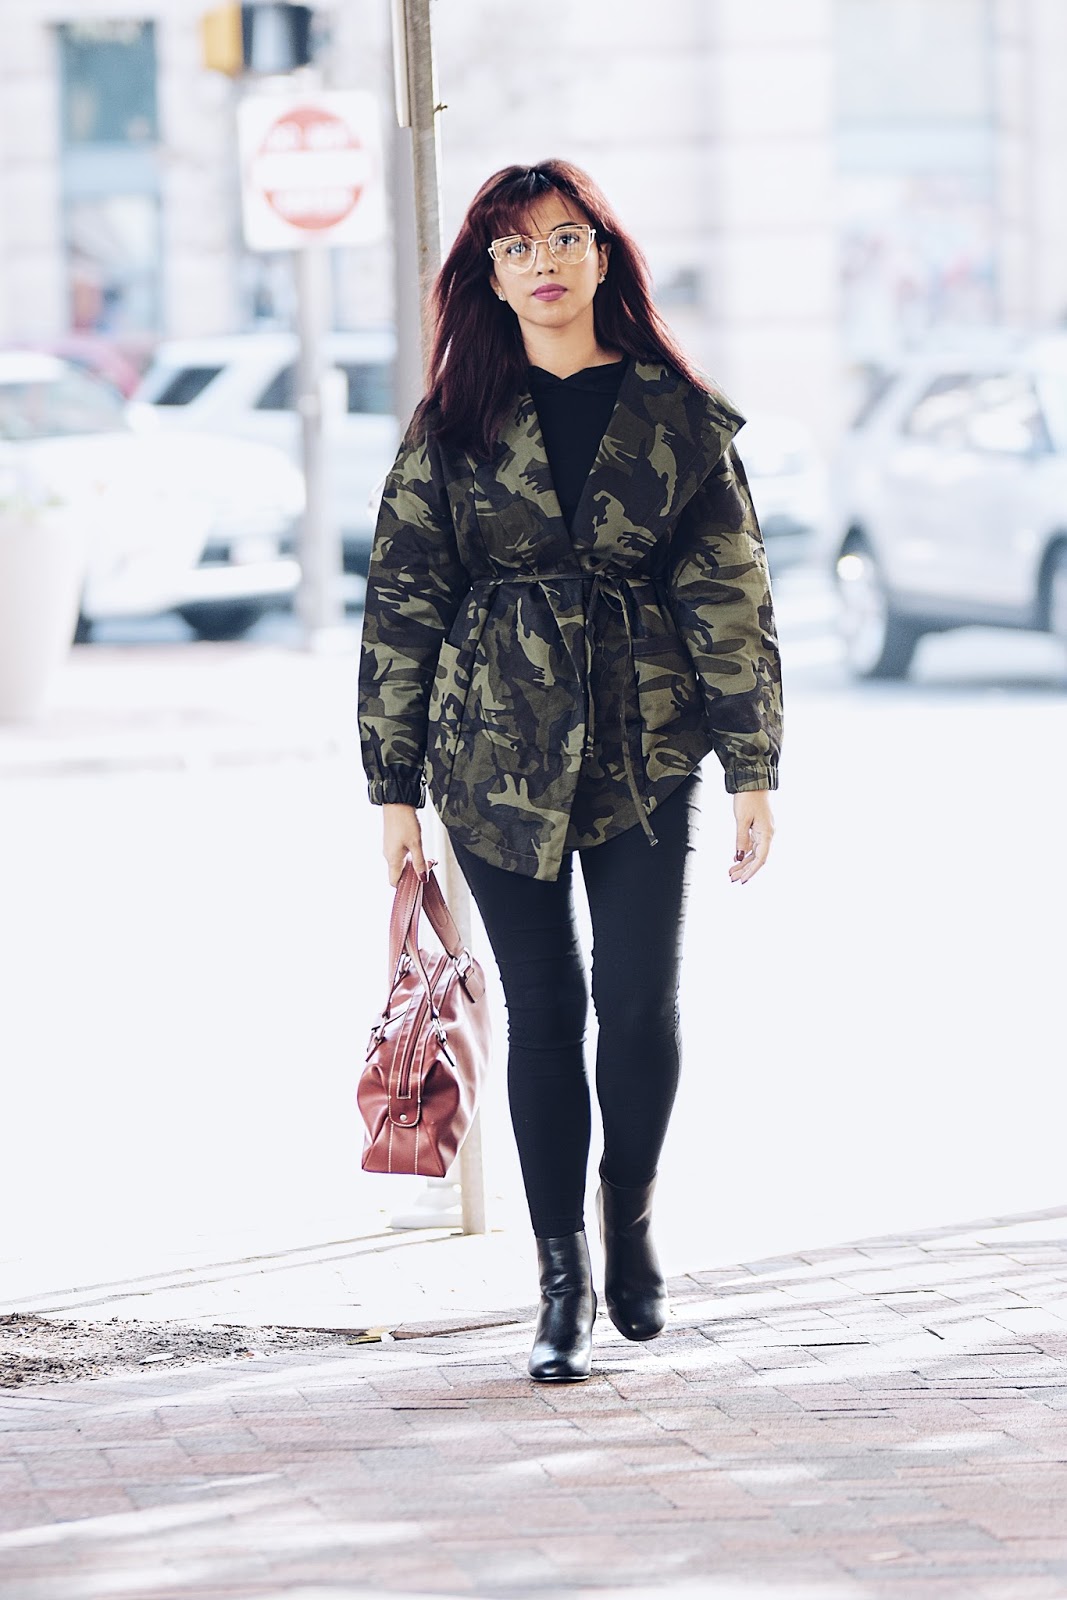 New Hair Style-MariEstilo-Camo Jacket-Look of the day-fashionblogger-boots of the day-fashionista-dcblogger-armandhugon